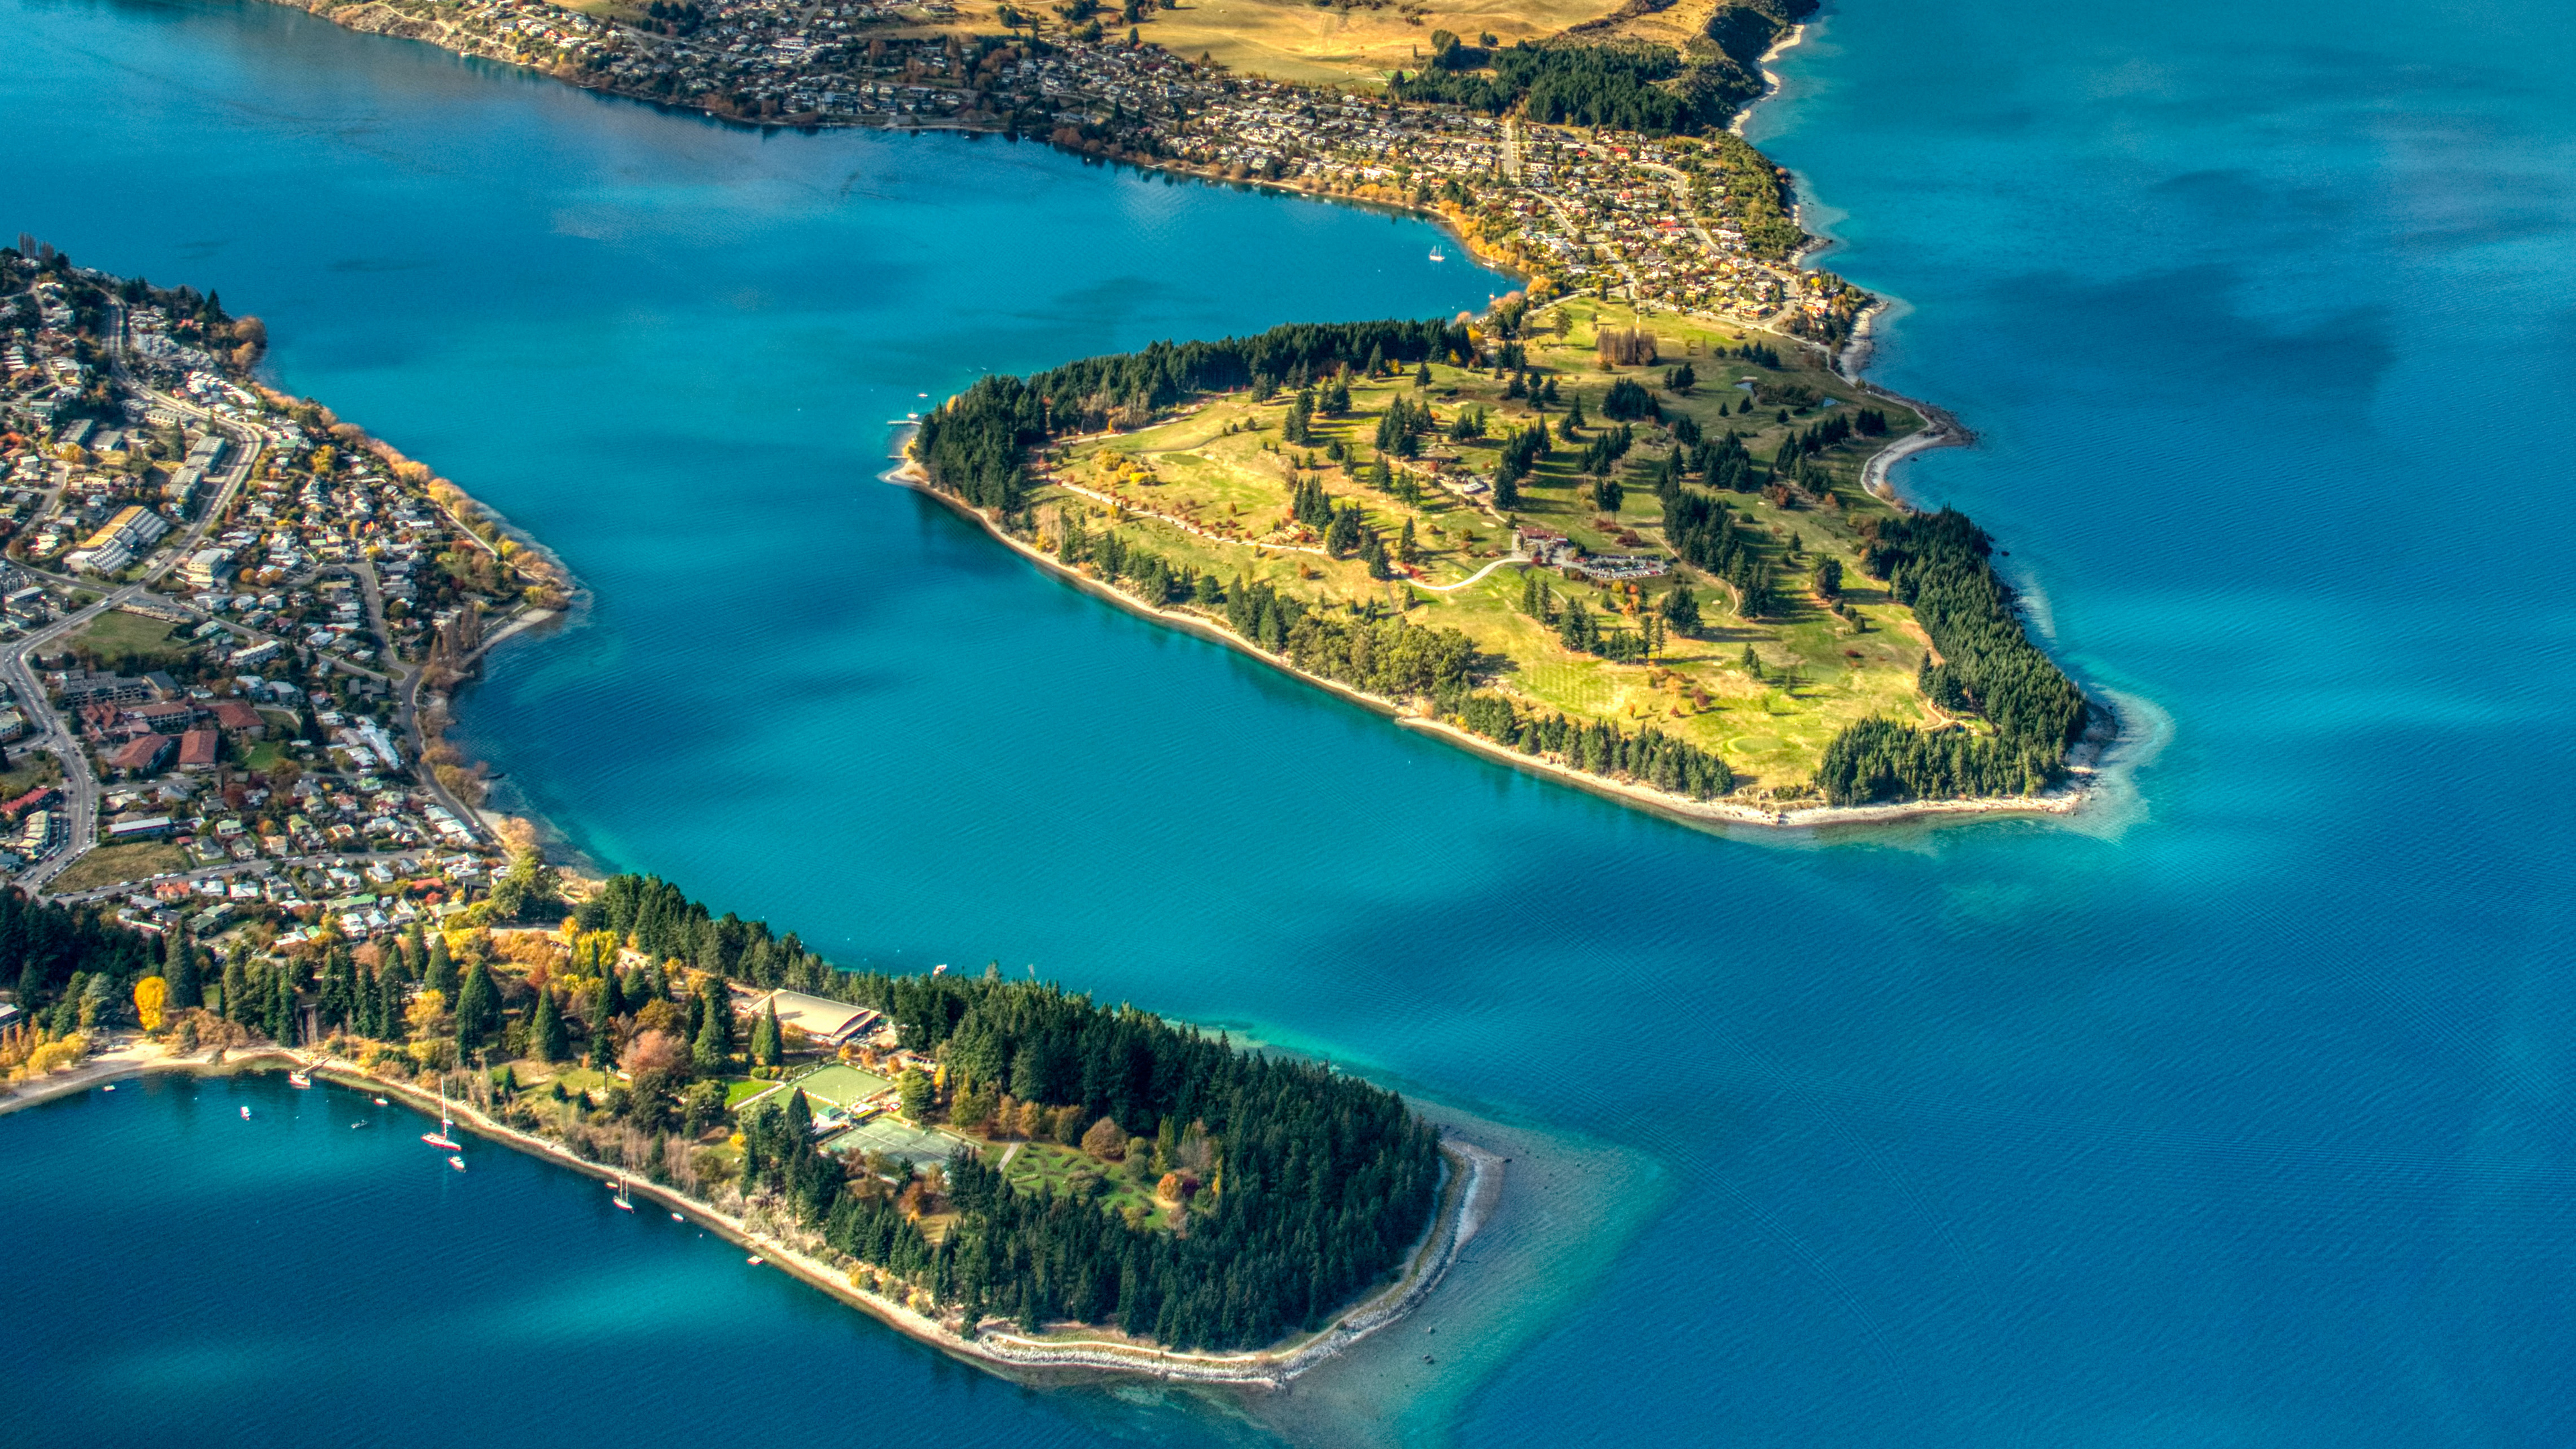 General 3840x2160 Trey Ratcliff photography landscape cityscape New Zealand Queenstown water peninsula building park field aerial view trees